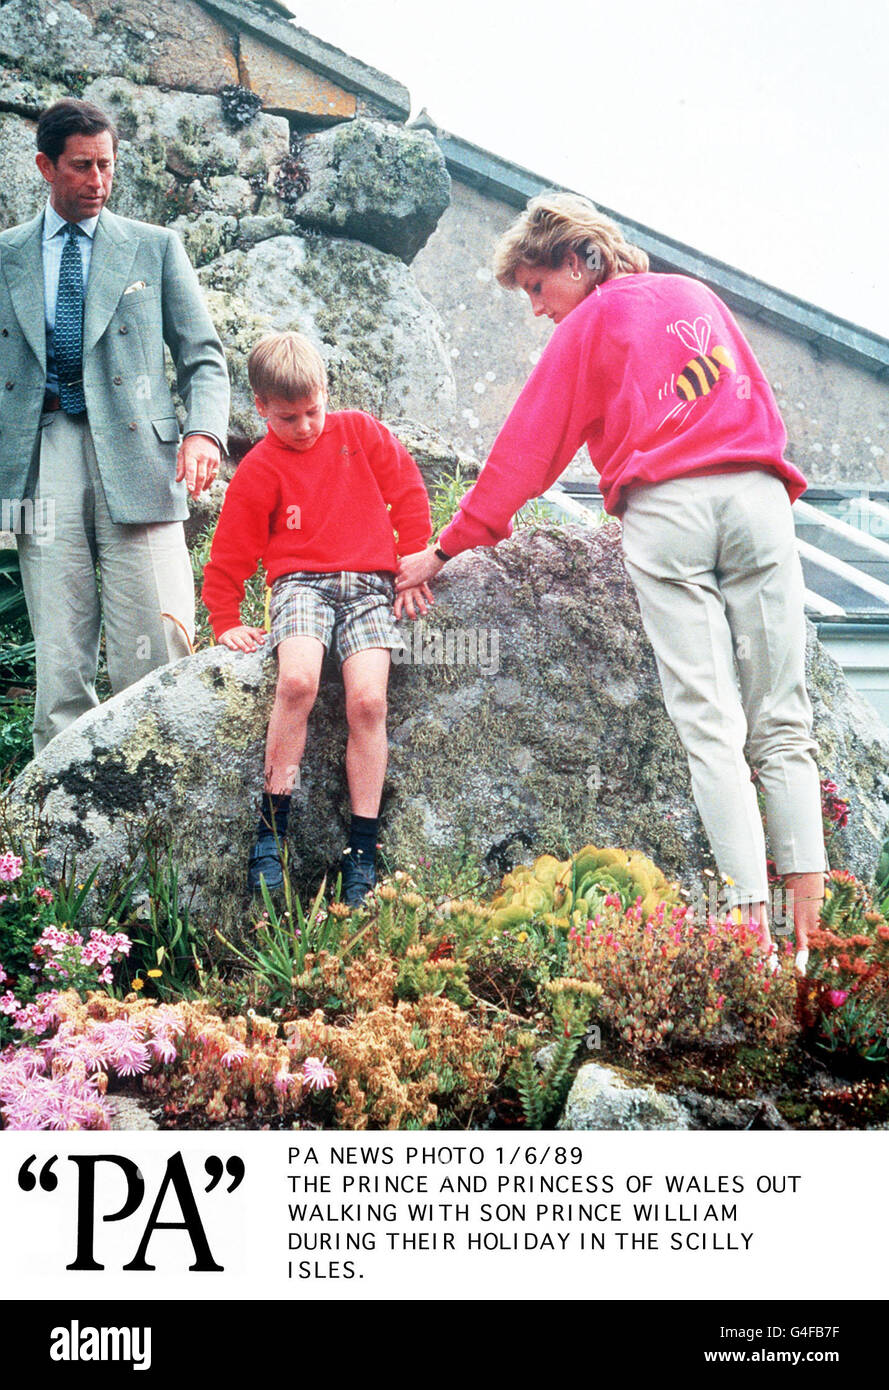 PA NEWS PHOTO 1/6/89 THE PRINCE AND PRINCESS OF WALES OUT WALKING WITH SON PRINCE WILLIAM DURING THEIR HOLIDAY IN THE SCILLY ISLES. (NEG. NO. 7230-3) Stock Photo